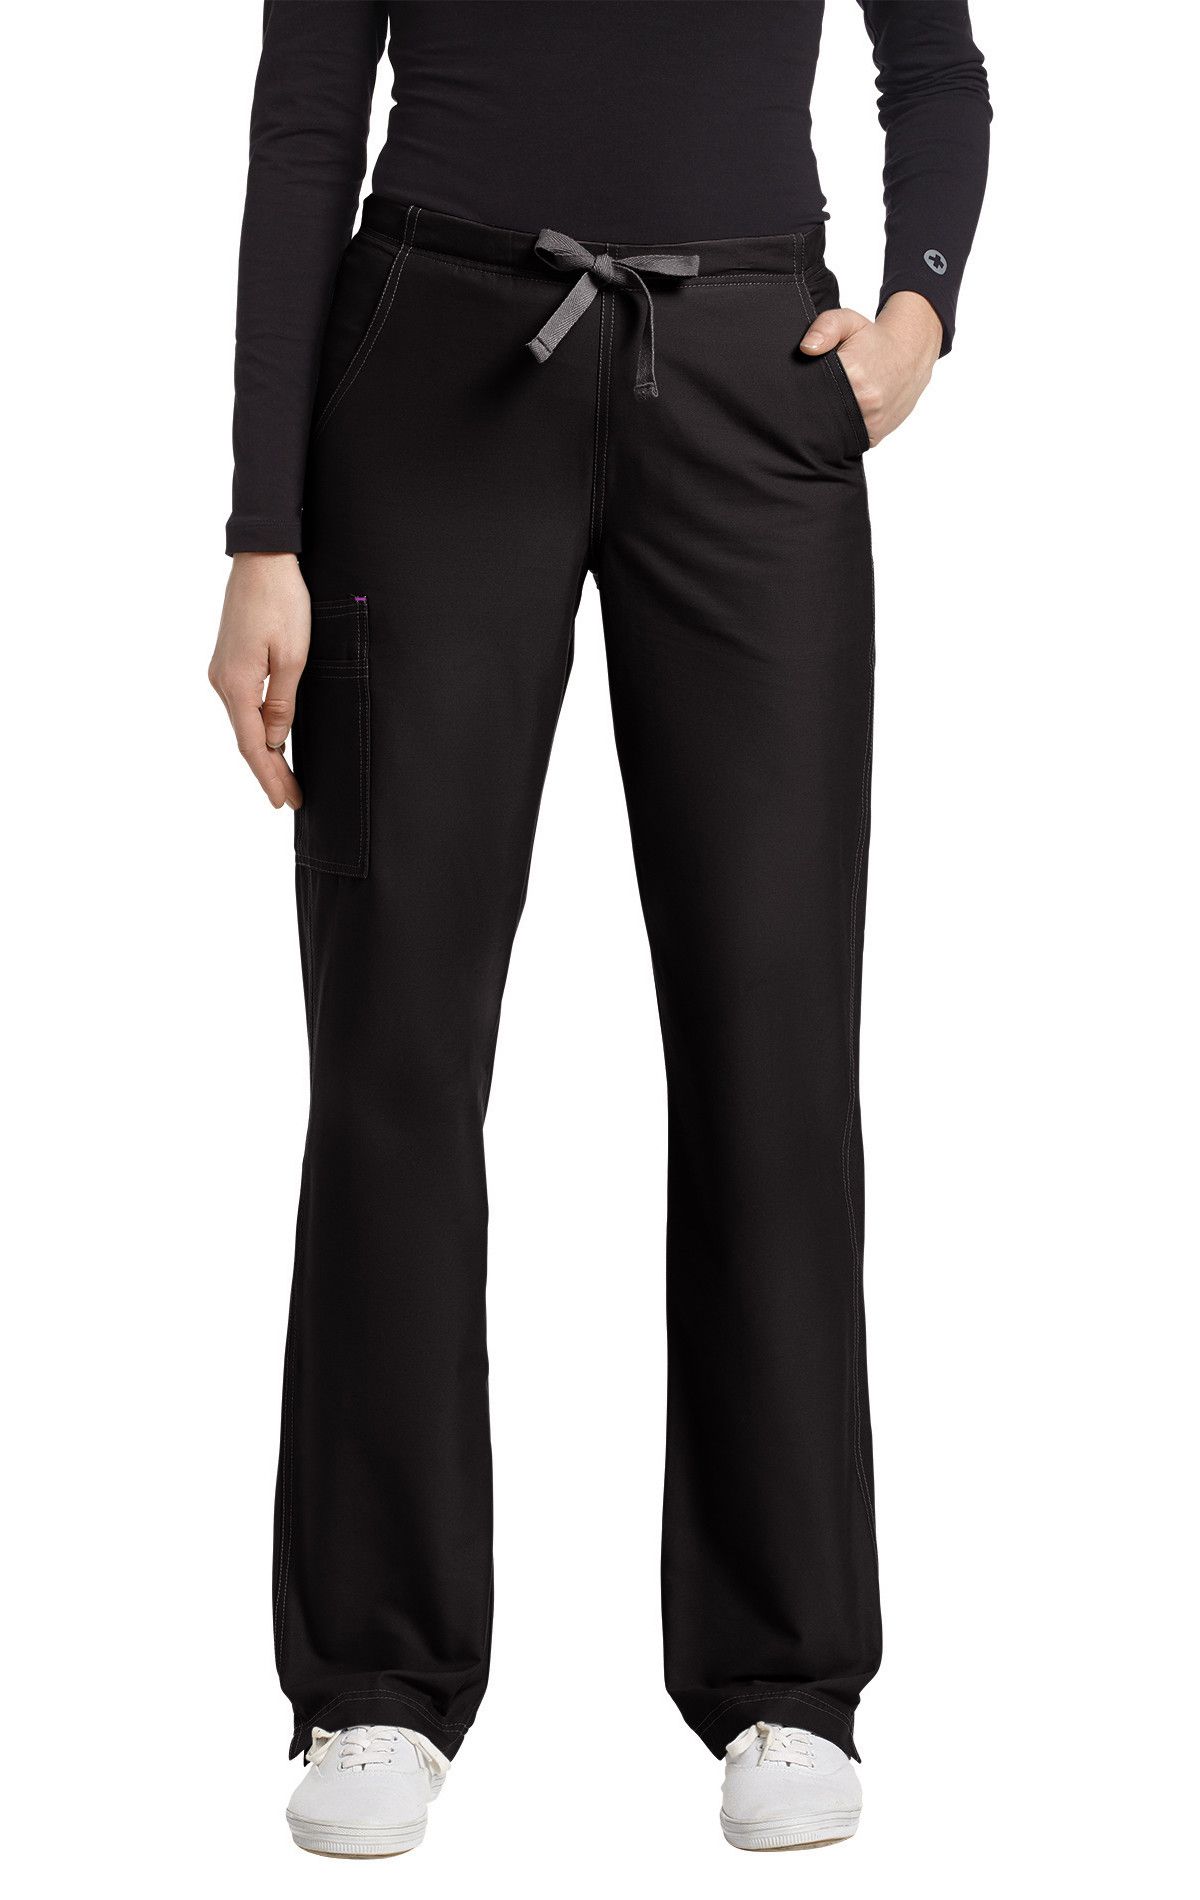 Buy Allure cargo pockets Pant - White Cross Online at Best price - TX